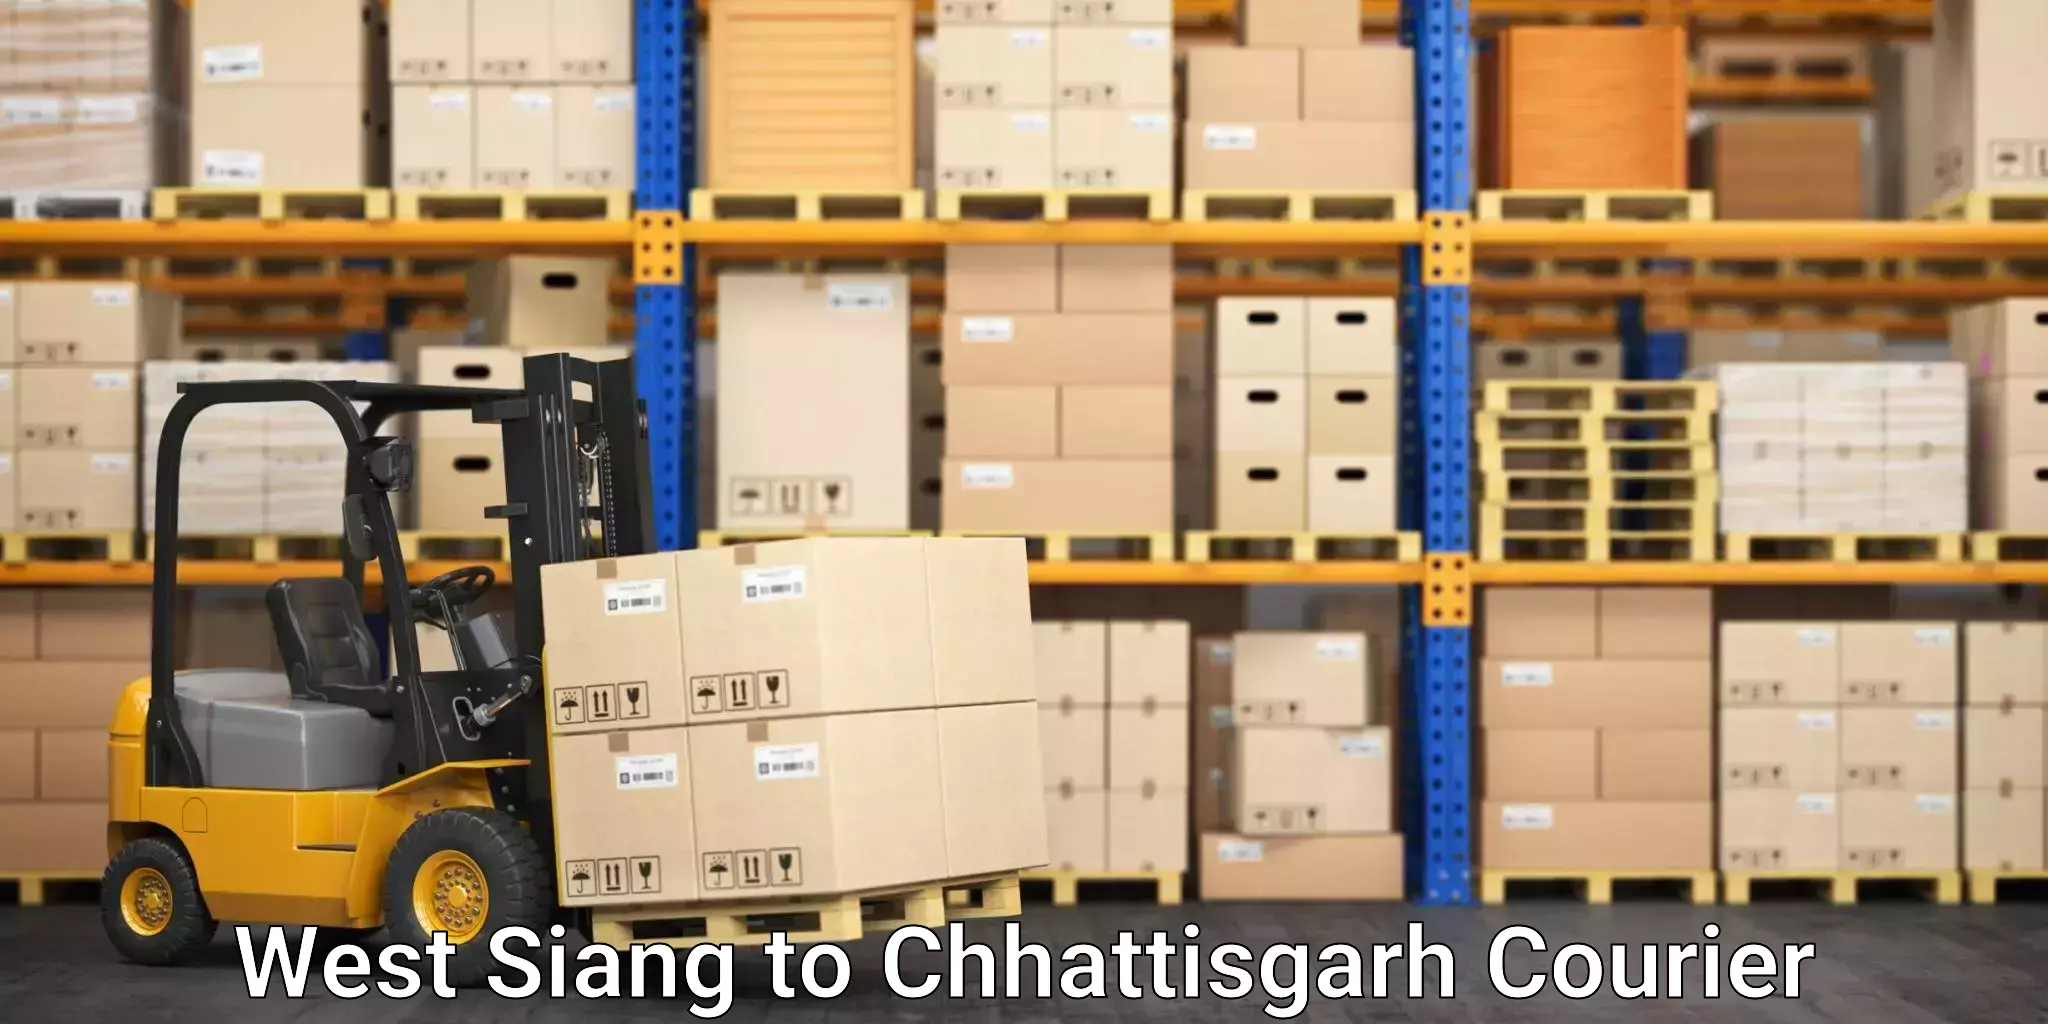 Reliable logistics providers West Siang to Nagri